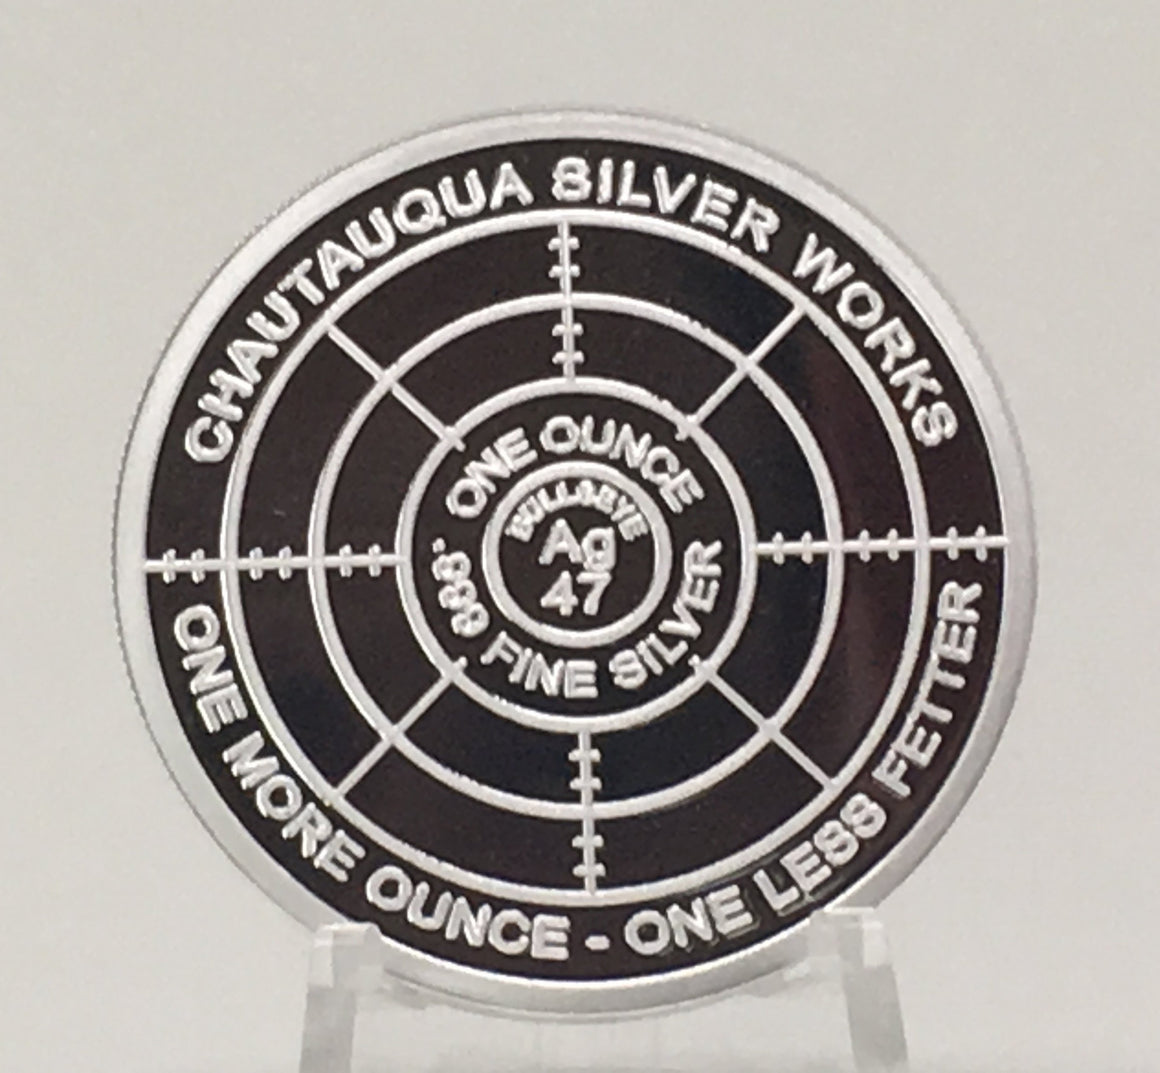 Ounce of Prevention - Innovation by Chautauqua Silver Works, 1oz .999 Fine Silver Round